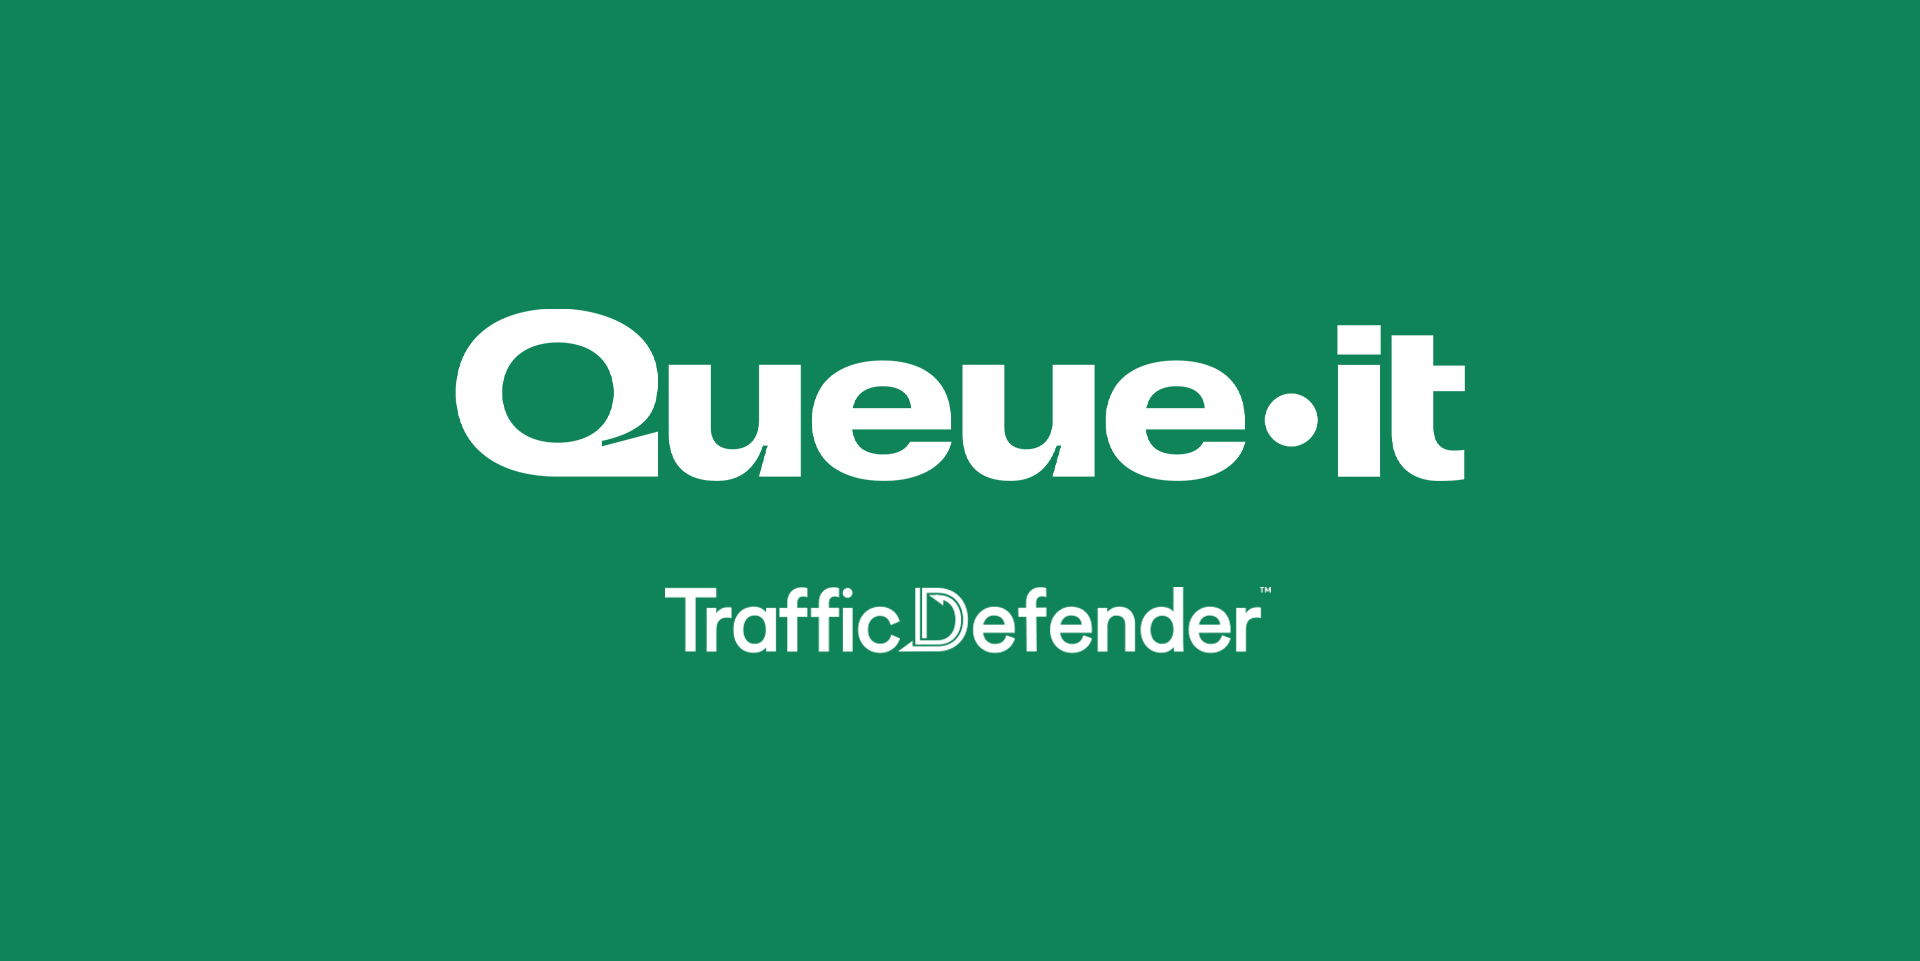 Queue-it & TrafficDefender logos on green background 